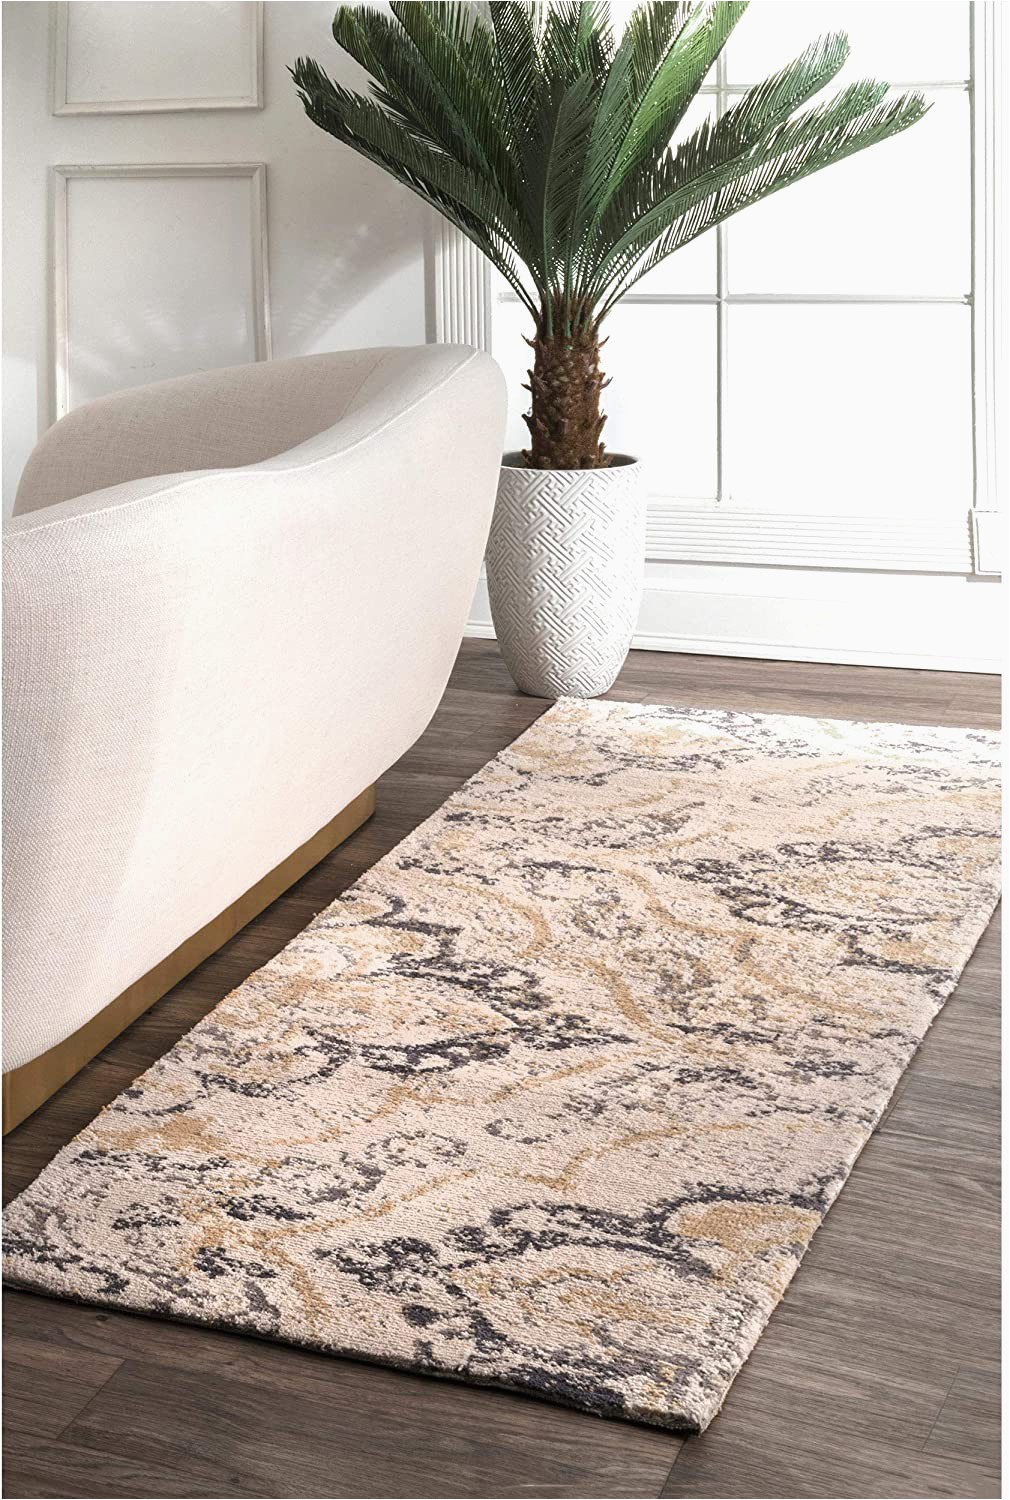 Nuloom Handmade Bold Abstract Floral Wool area Rug Nuloom Cortney Floral Runner Rug 2 6" X 8 Ivory